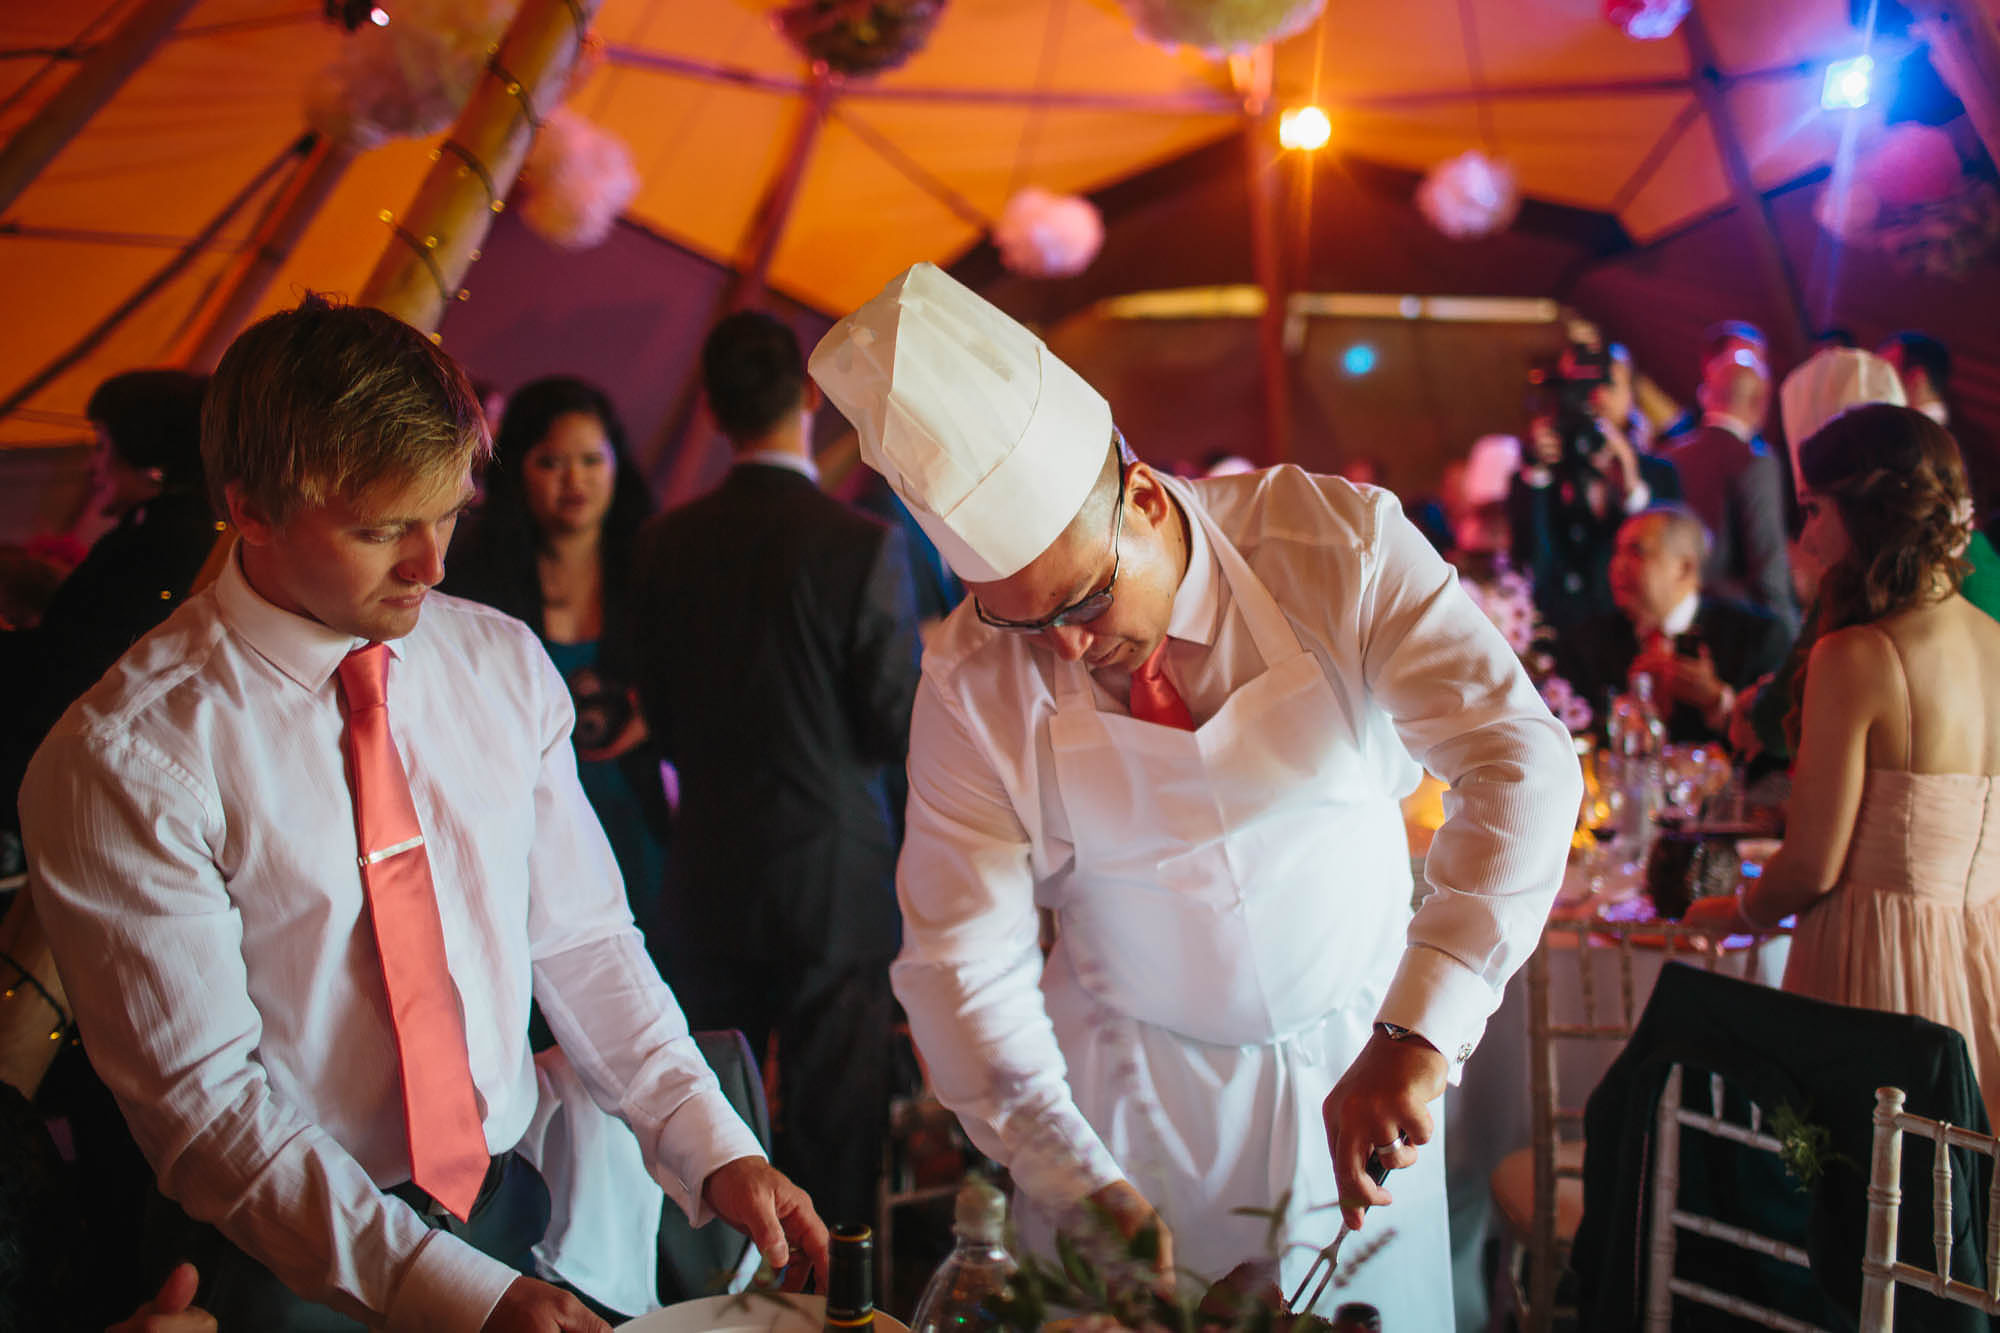 Guests carving meat at the table in a chefs hat at a tipi wedding